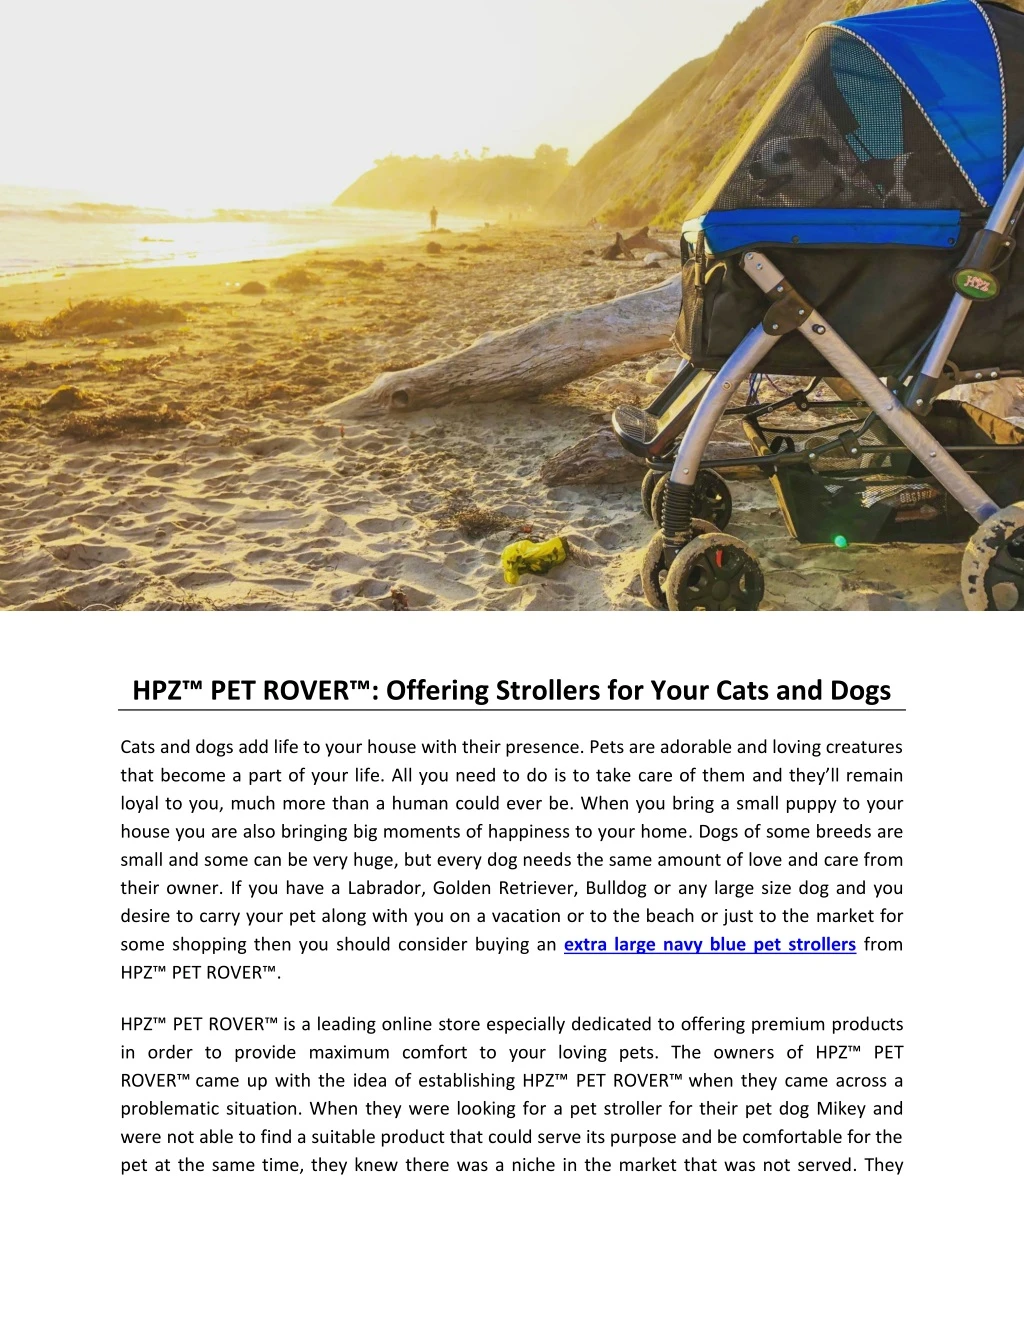 hpz pet rover offering strollers for your cats